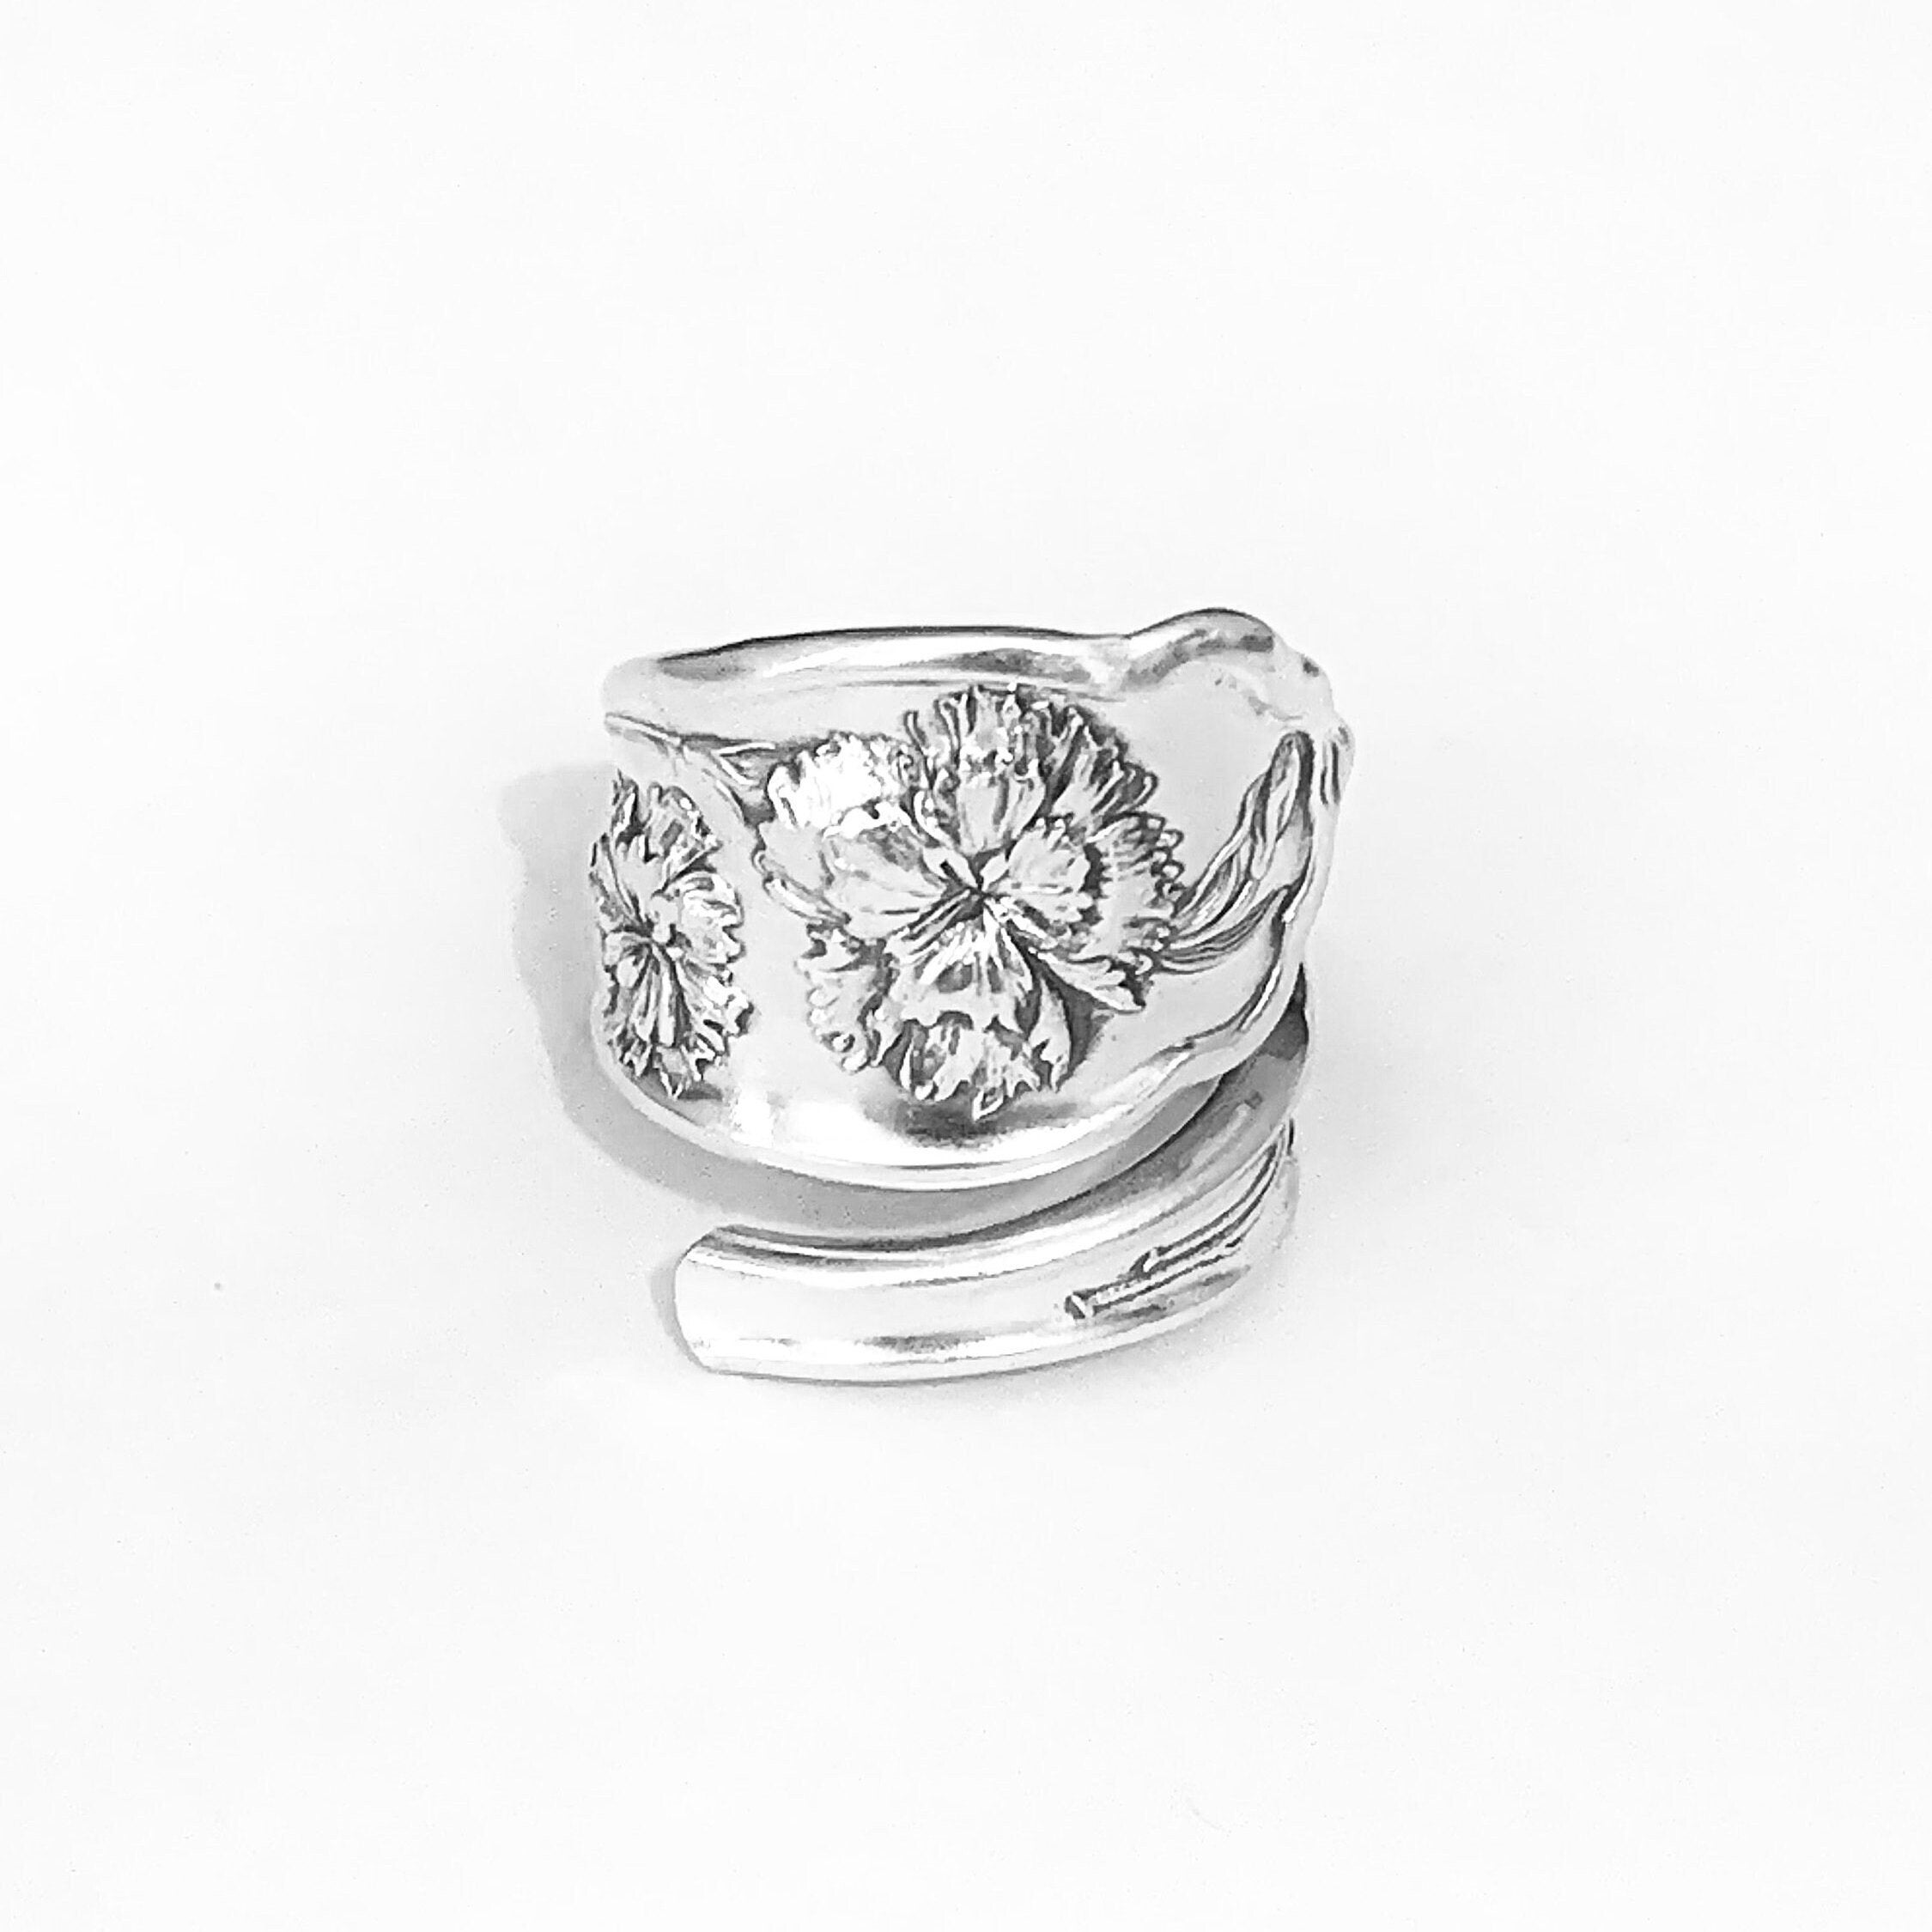 Carnation sterling silver scarf ring